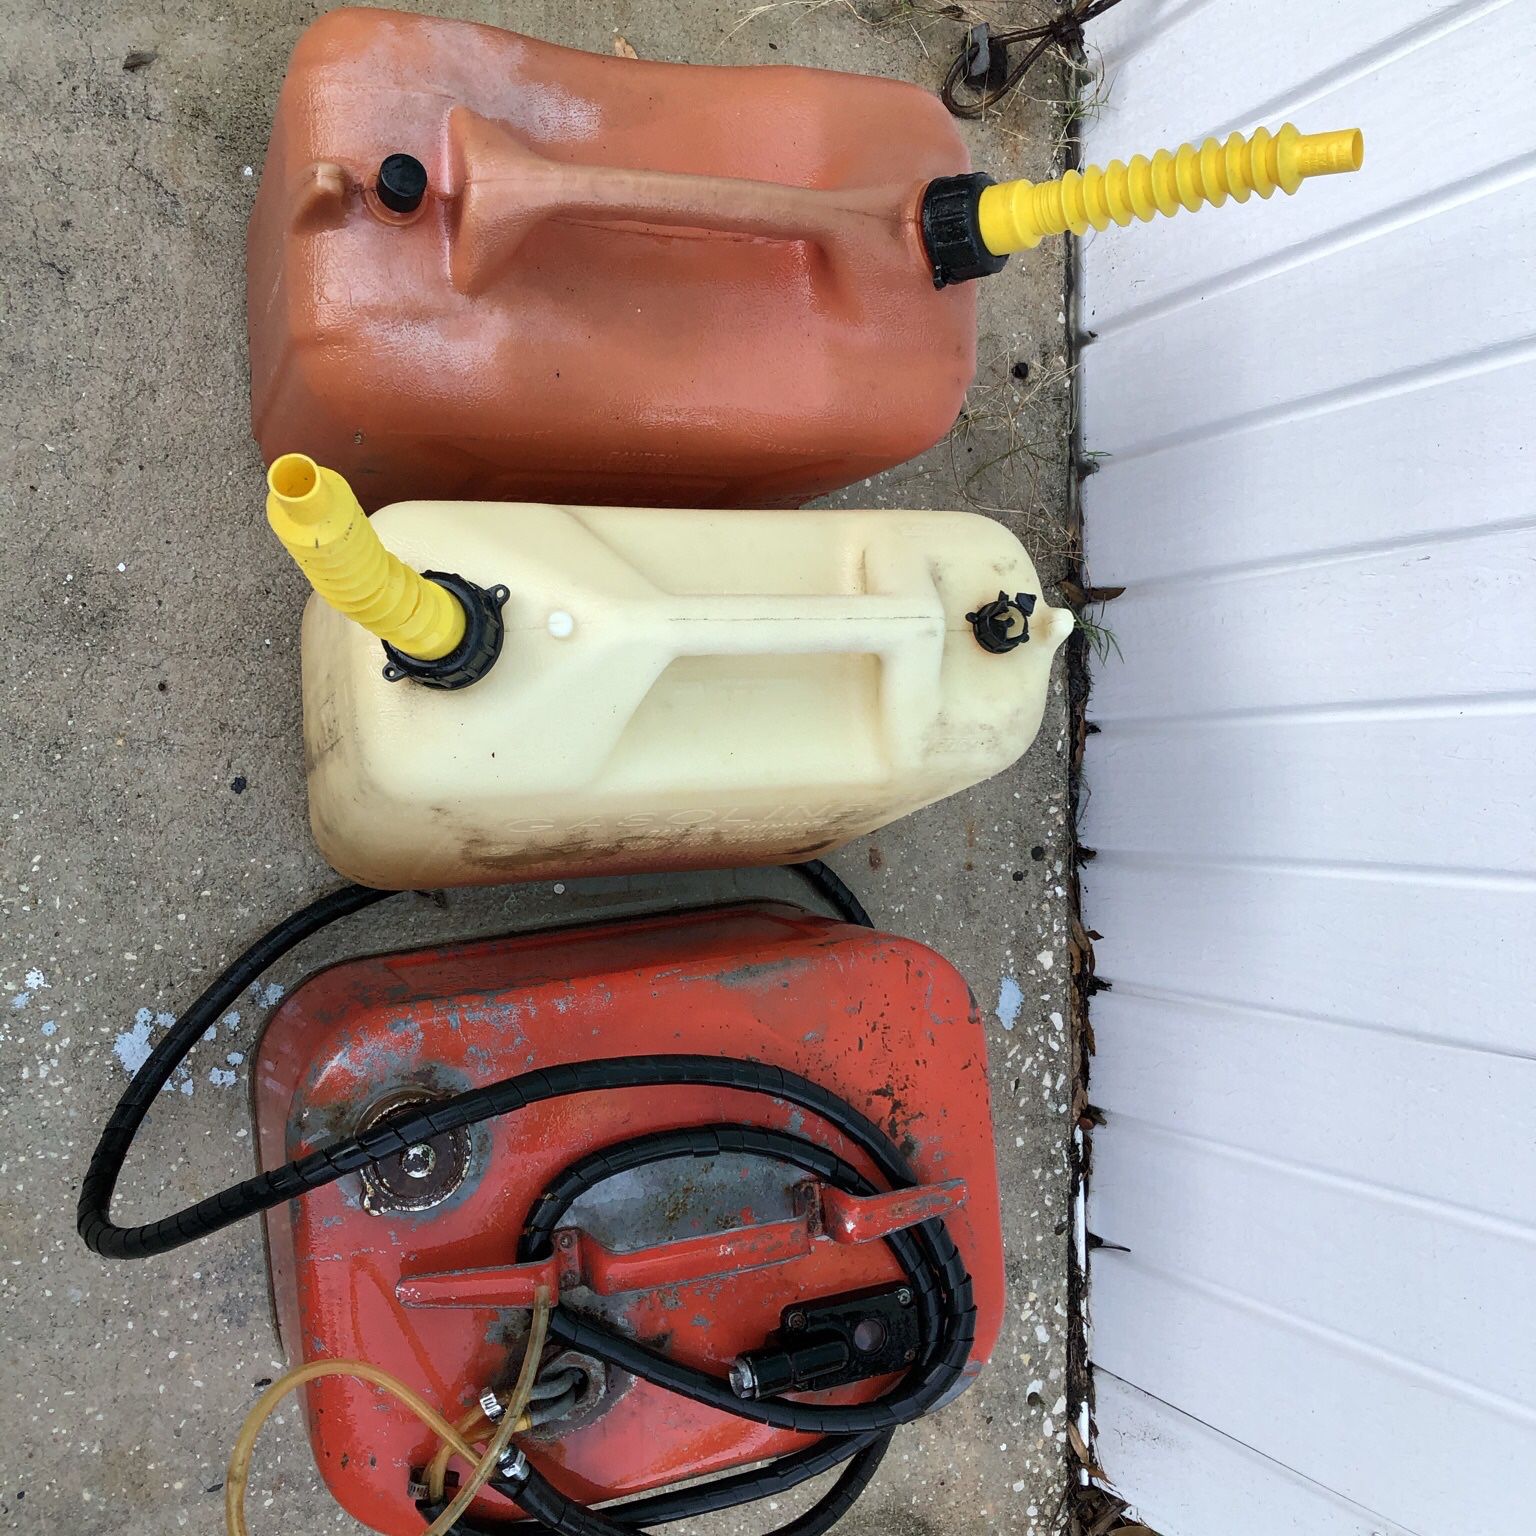 (2) 6 Gallon Gas Cans & Tank For Outboard Motor